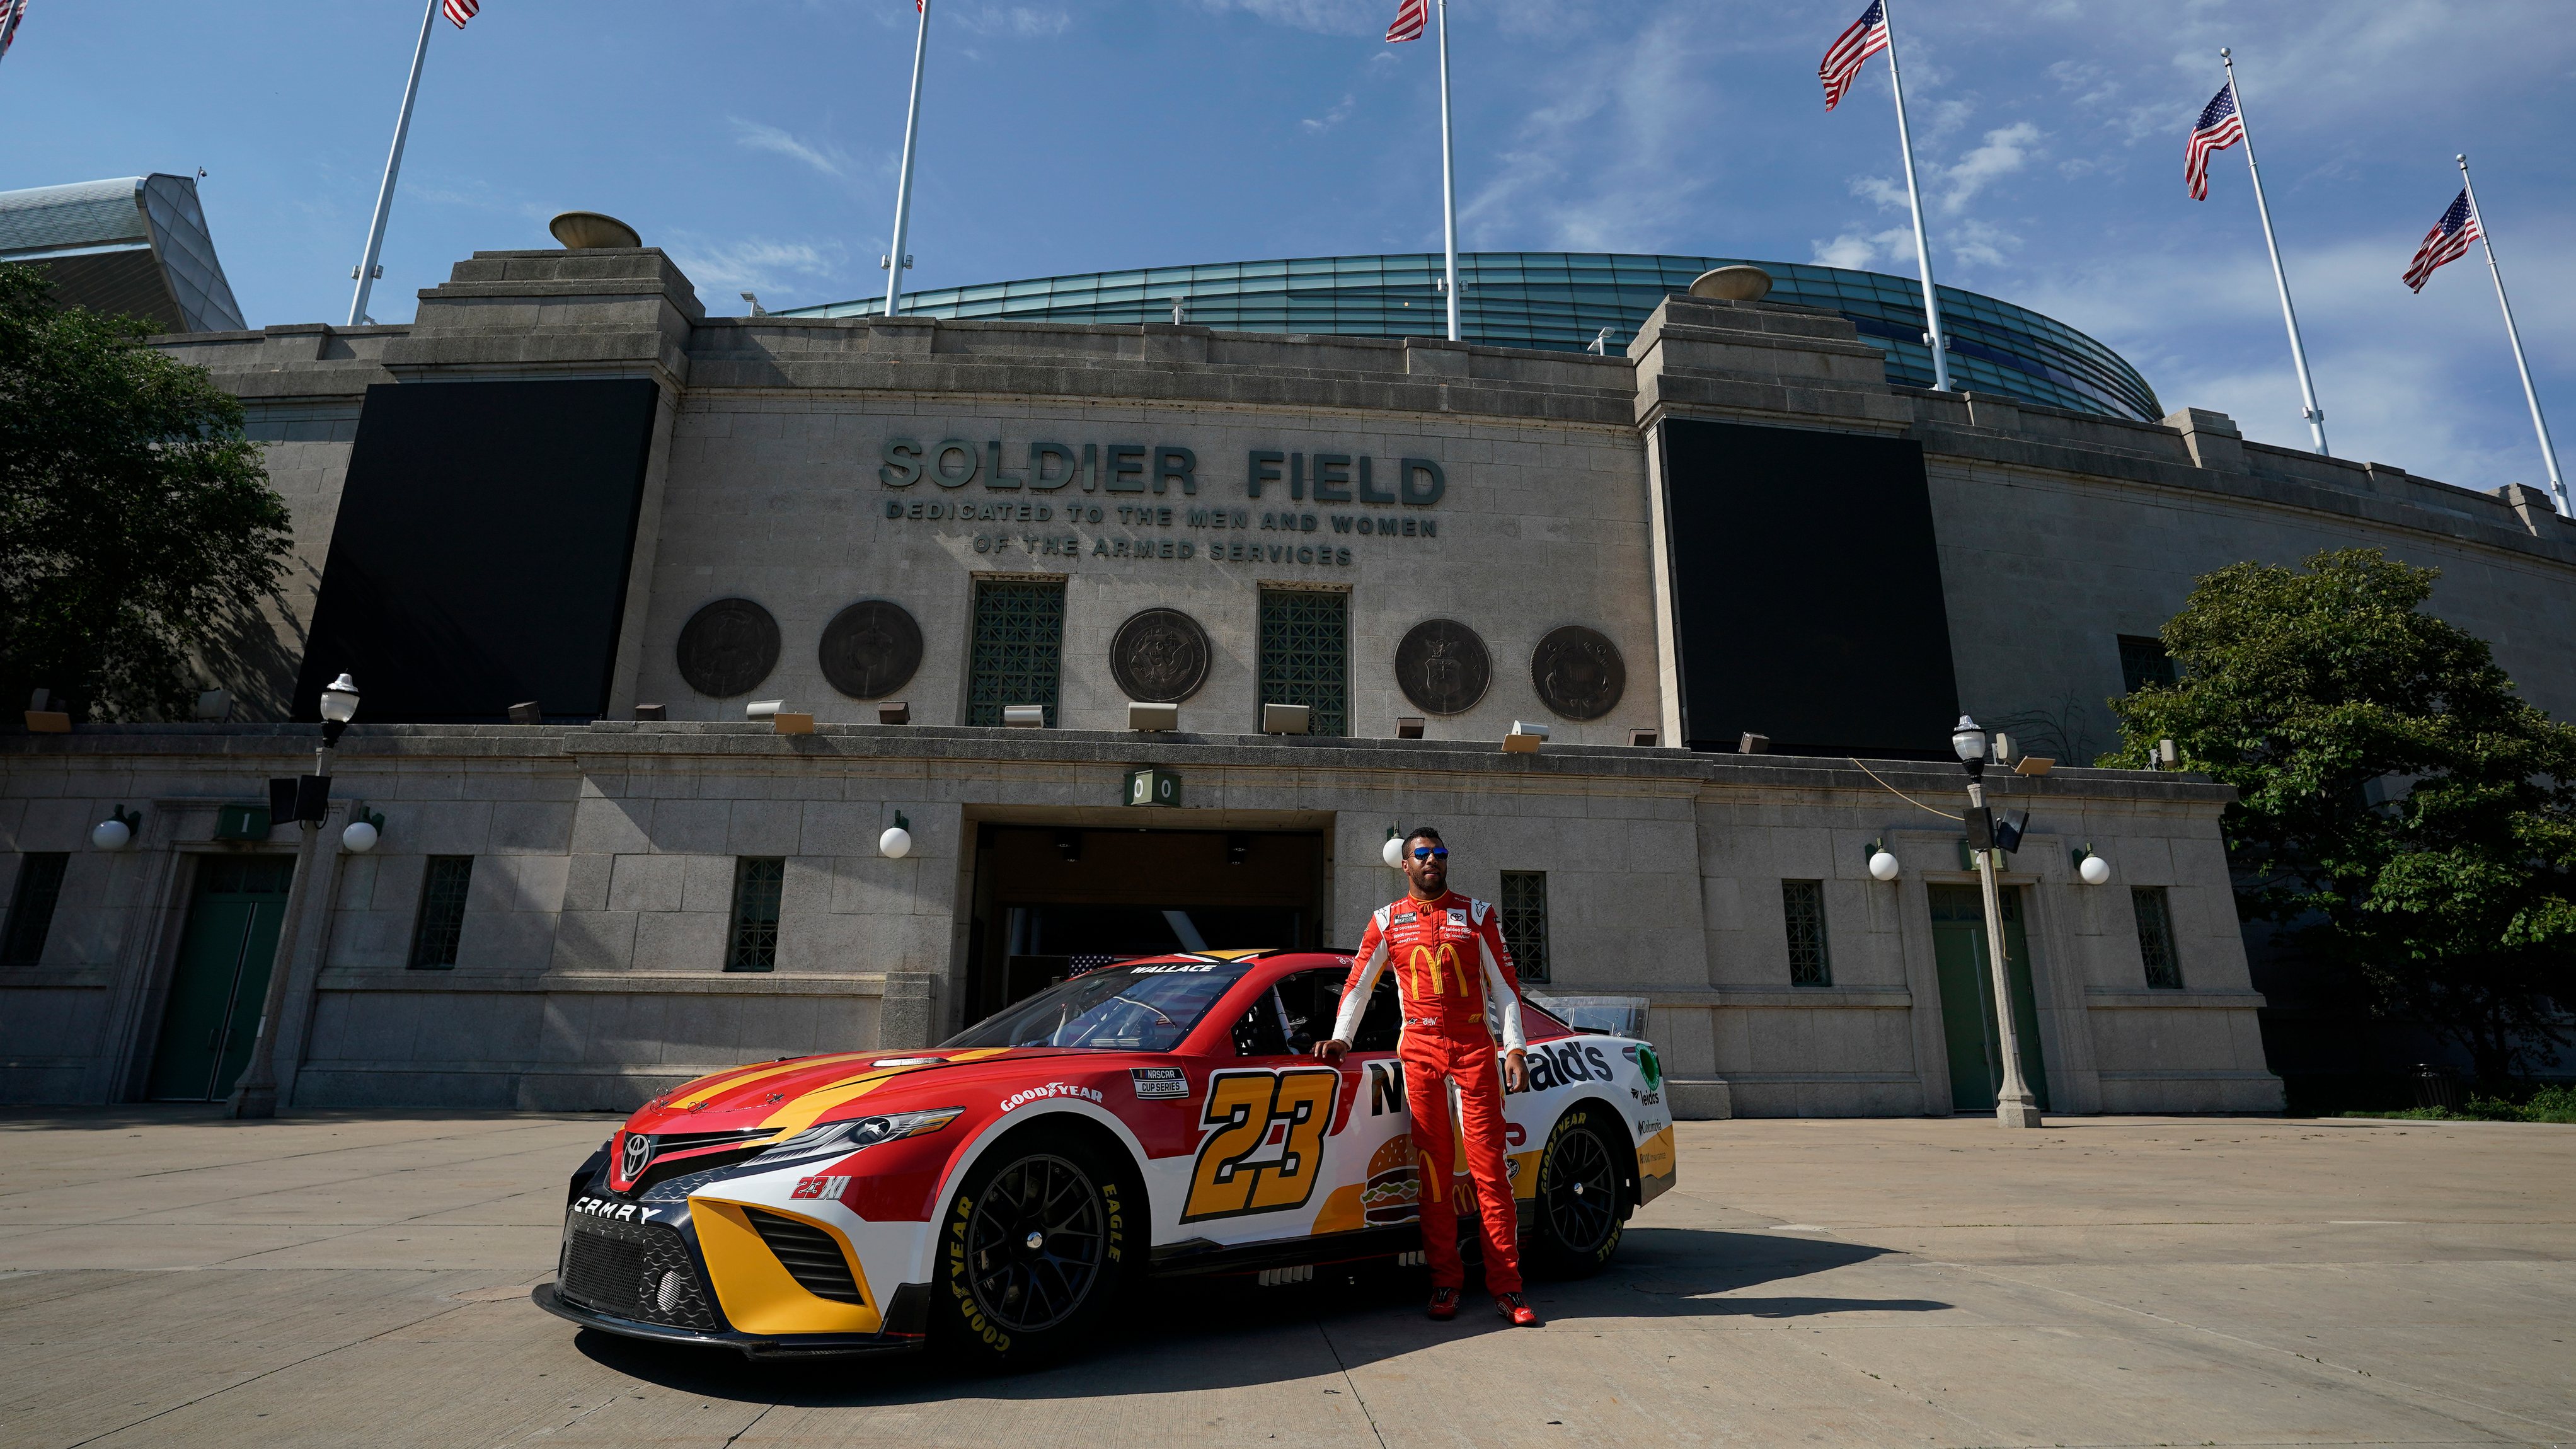 2023 NASCAR Chicago Street Race how to watch, start time, TV info